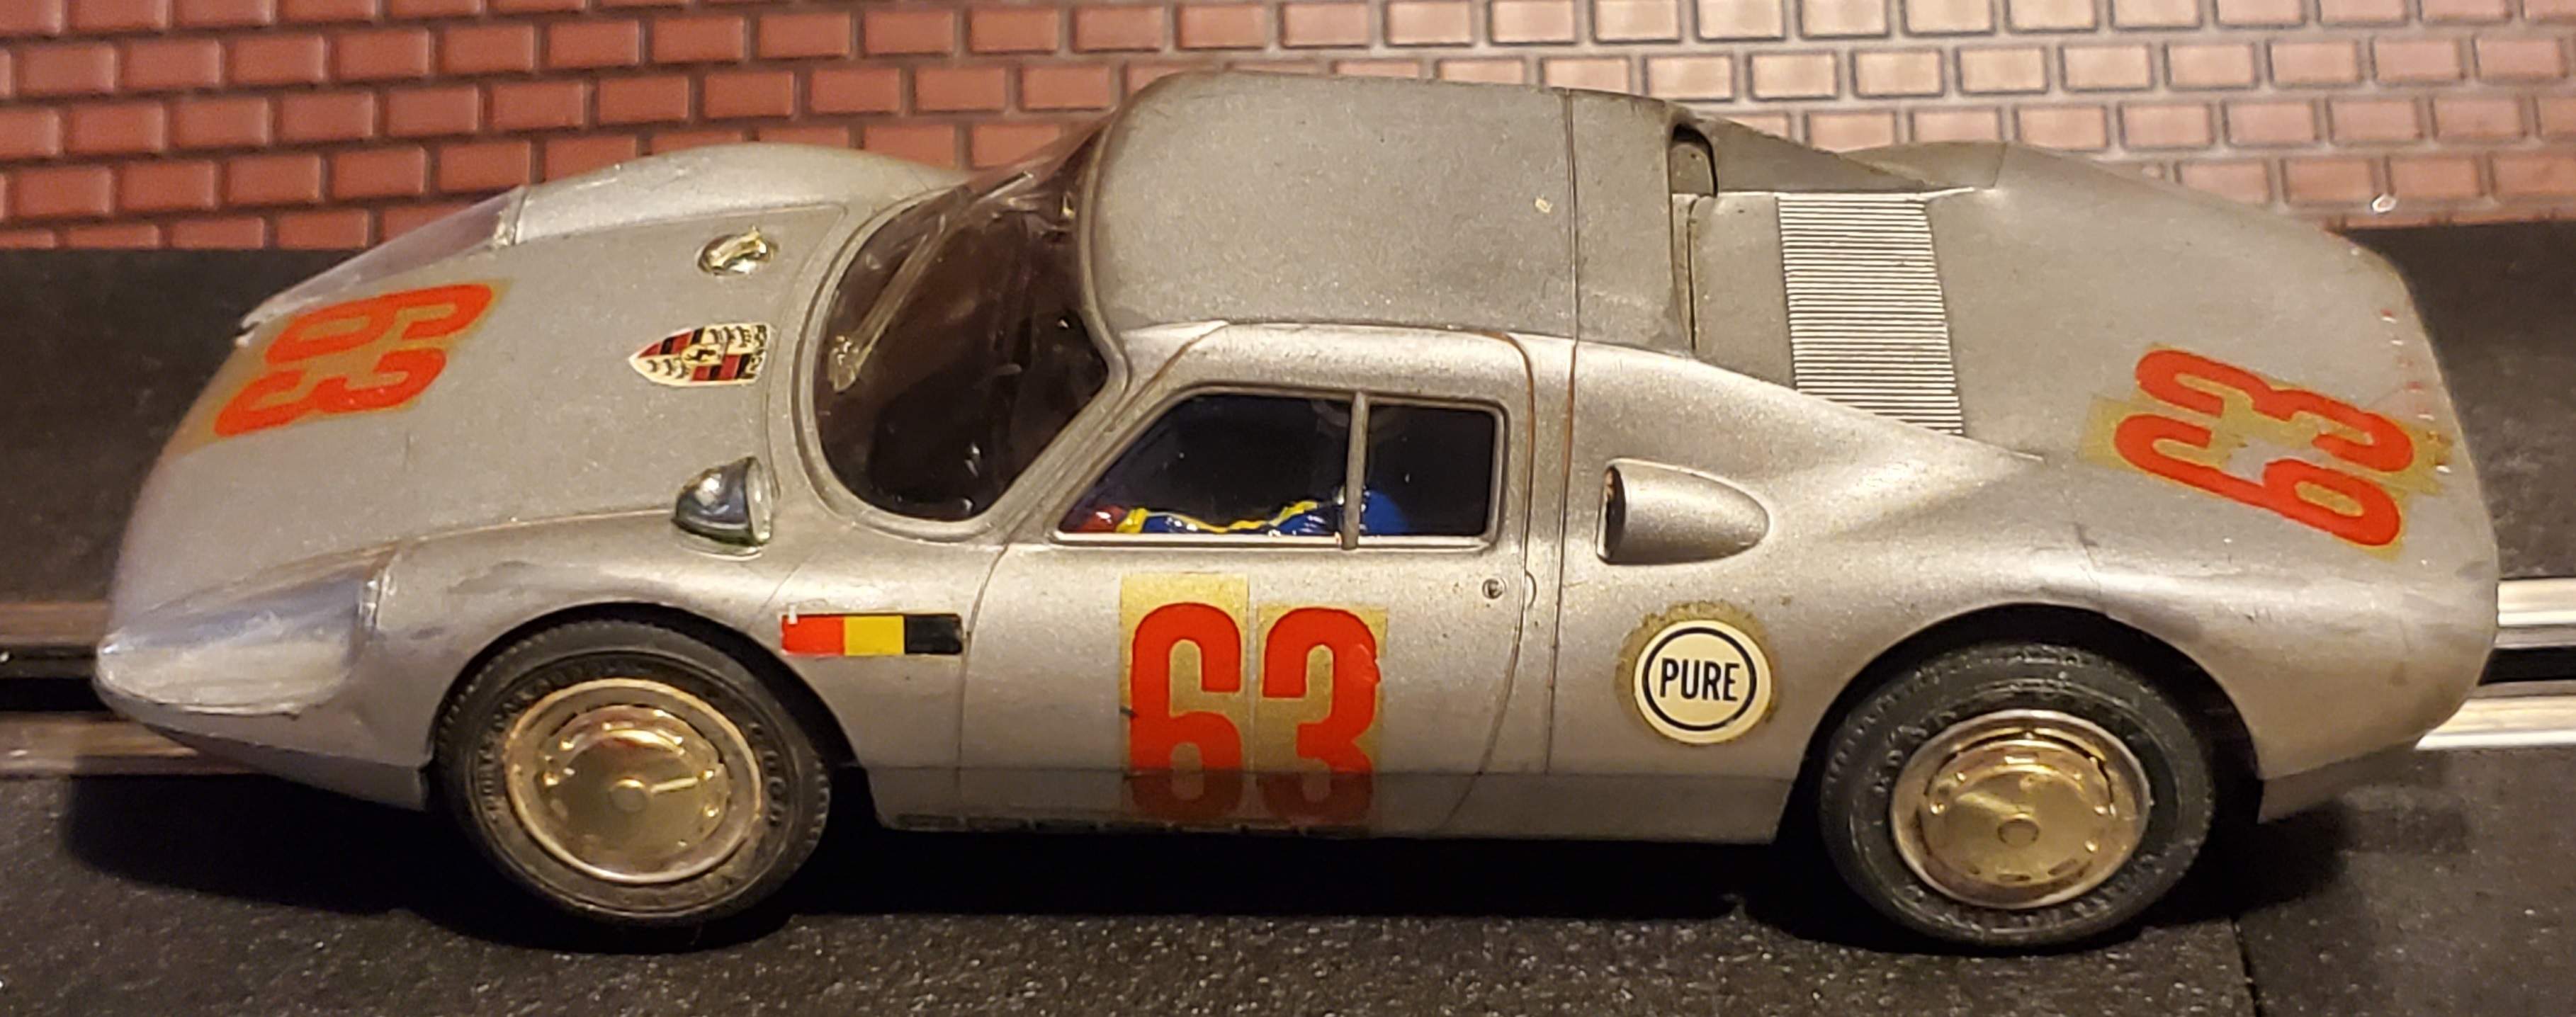 * SOLD 7-29-23 * * Sale, Save $30 off our Ebay store price * 1963 Porsche 904 GTS - Car 63